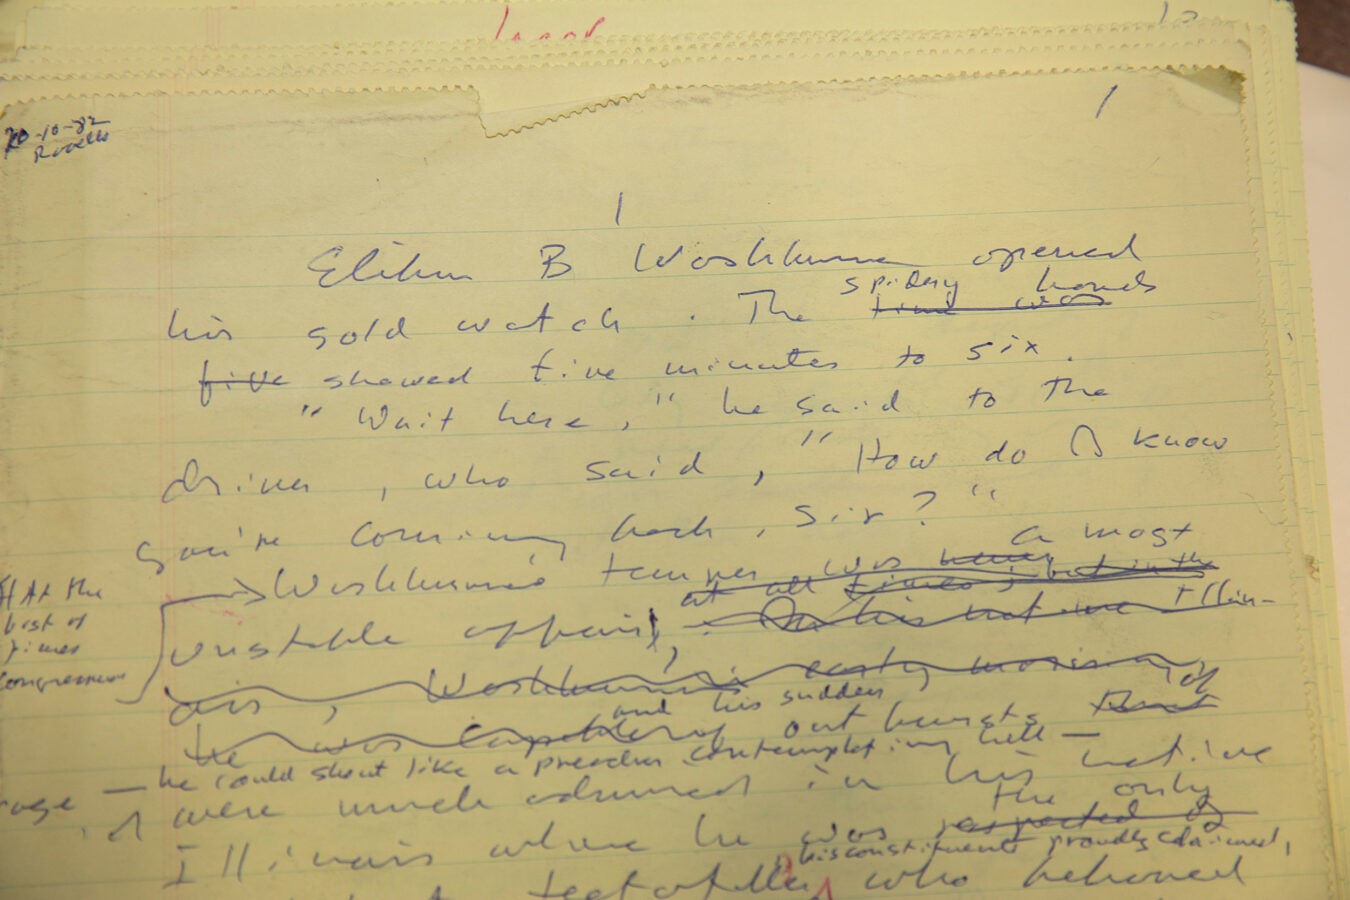 Longhand draft of "Lincoln" by Gore Vidal.